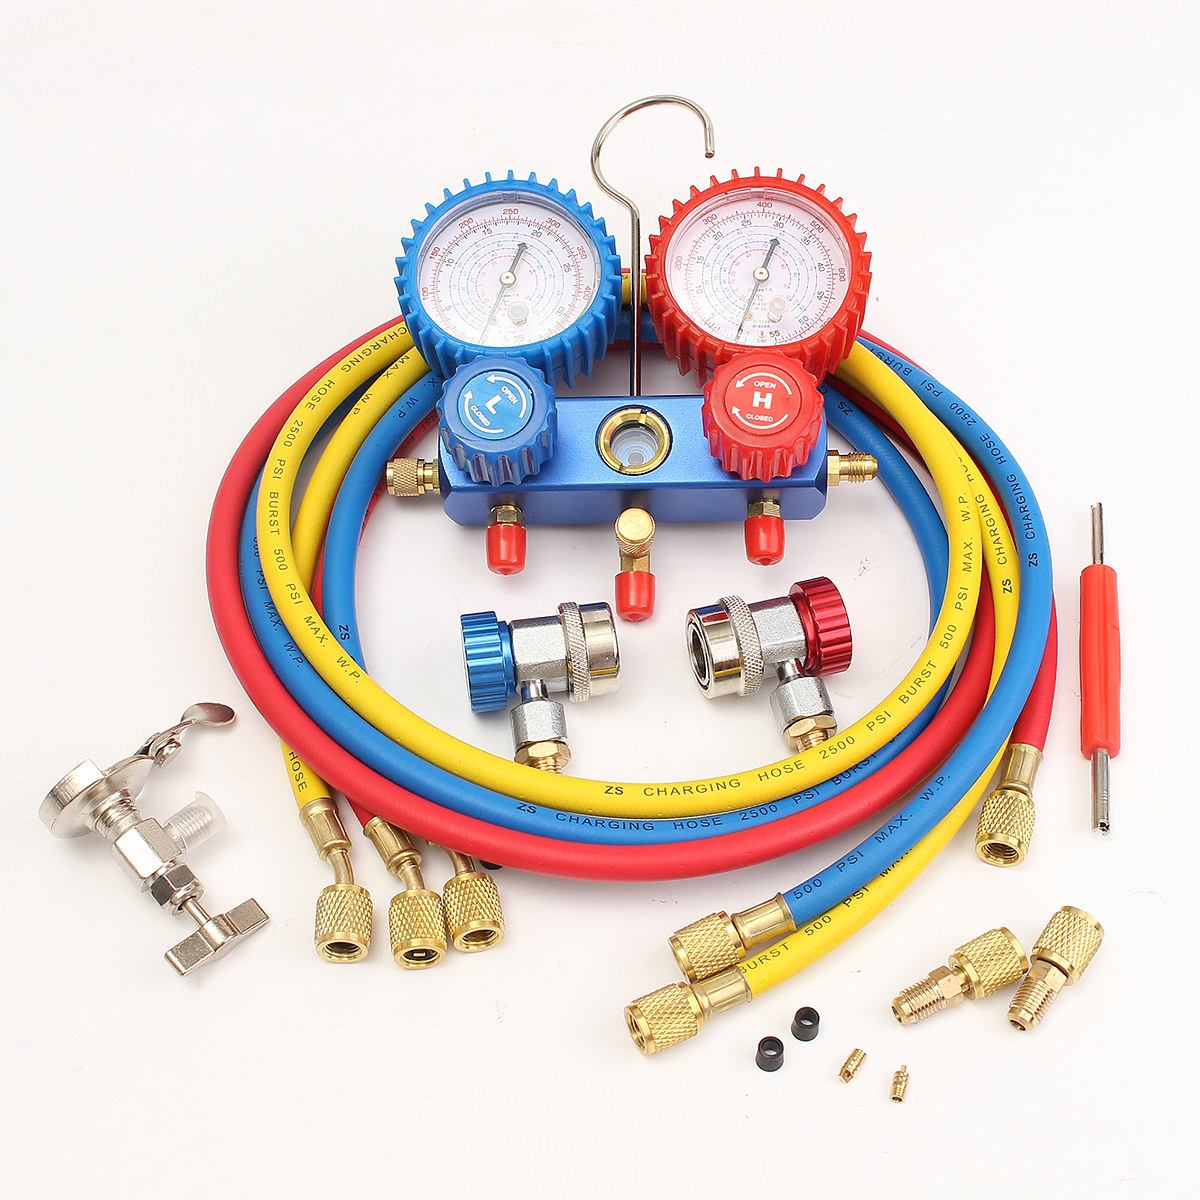 AC-Refrigerant-Manifold-Gauge-Set-Air-Conditioning-Tools-with-Hose-and-Hook-for-Air-Condition-1545648-5